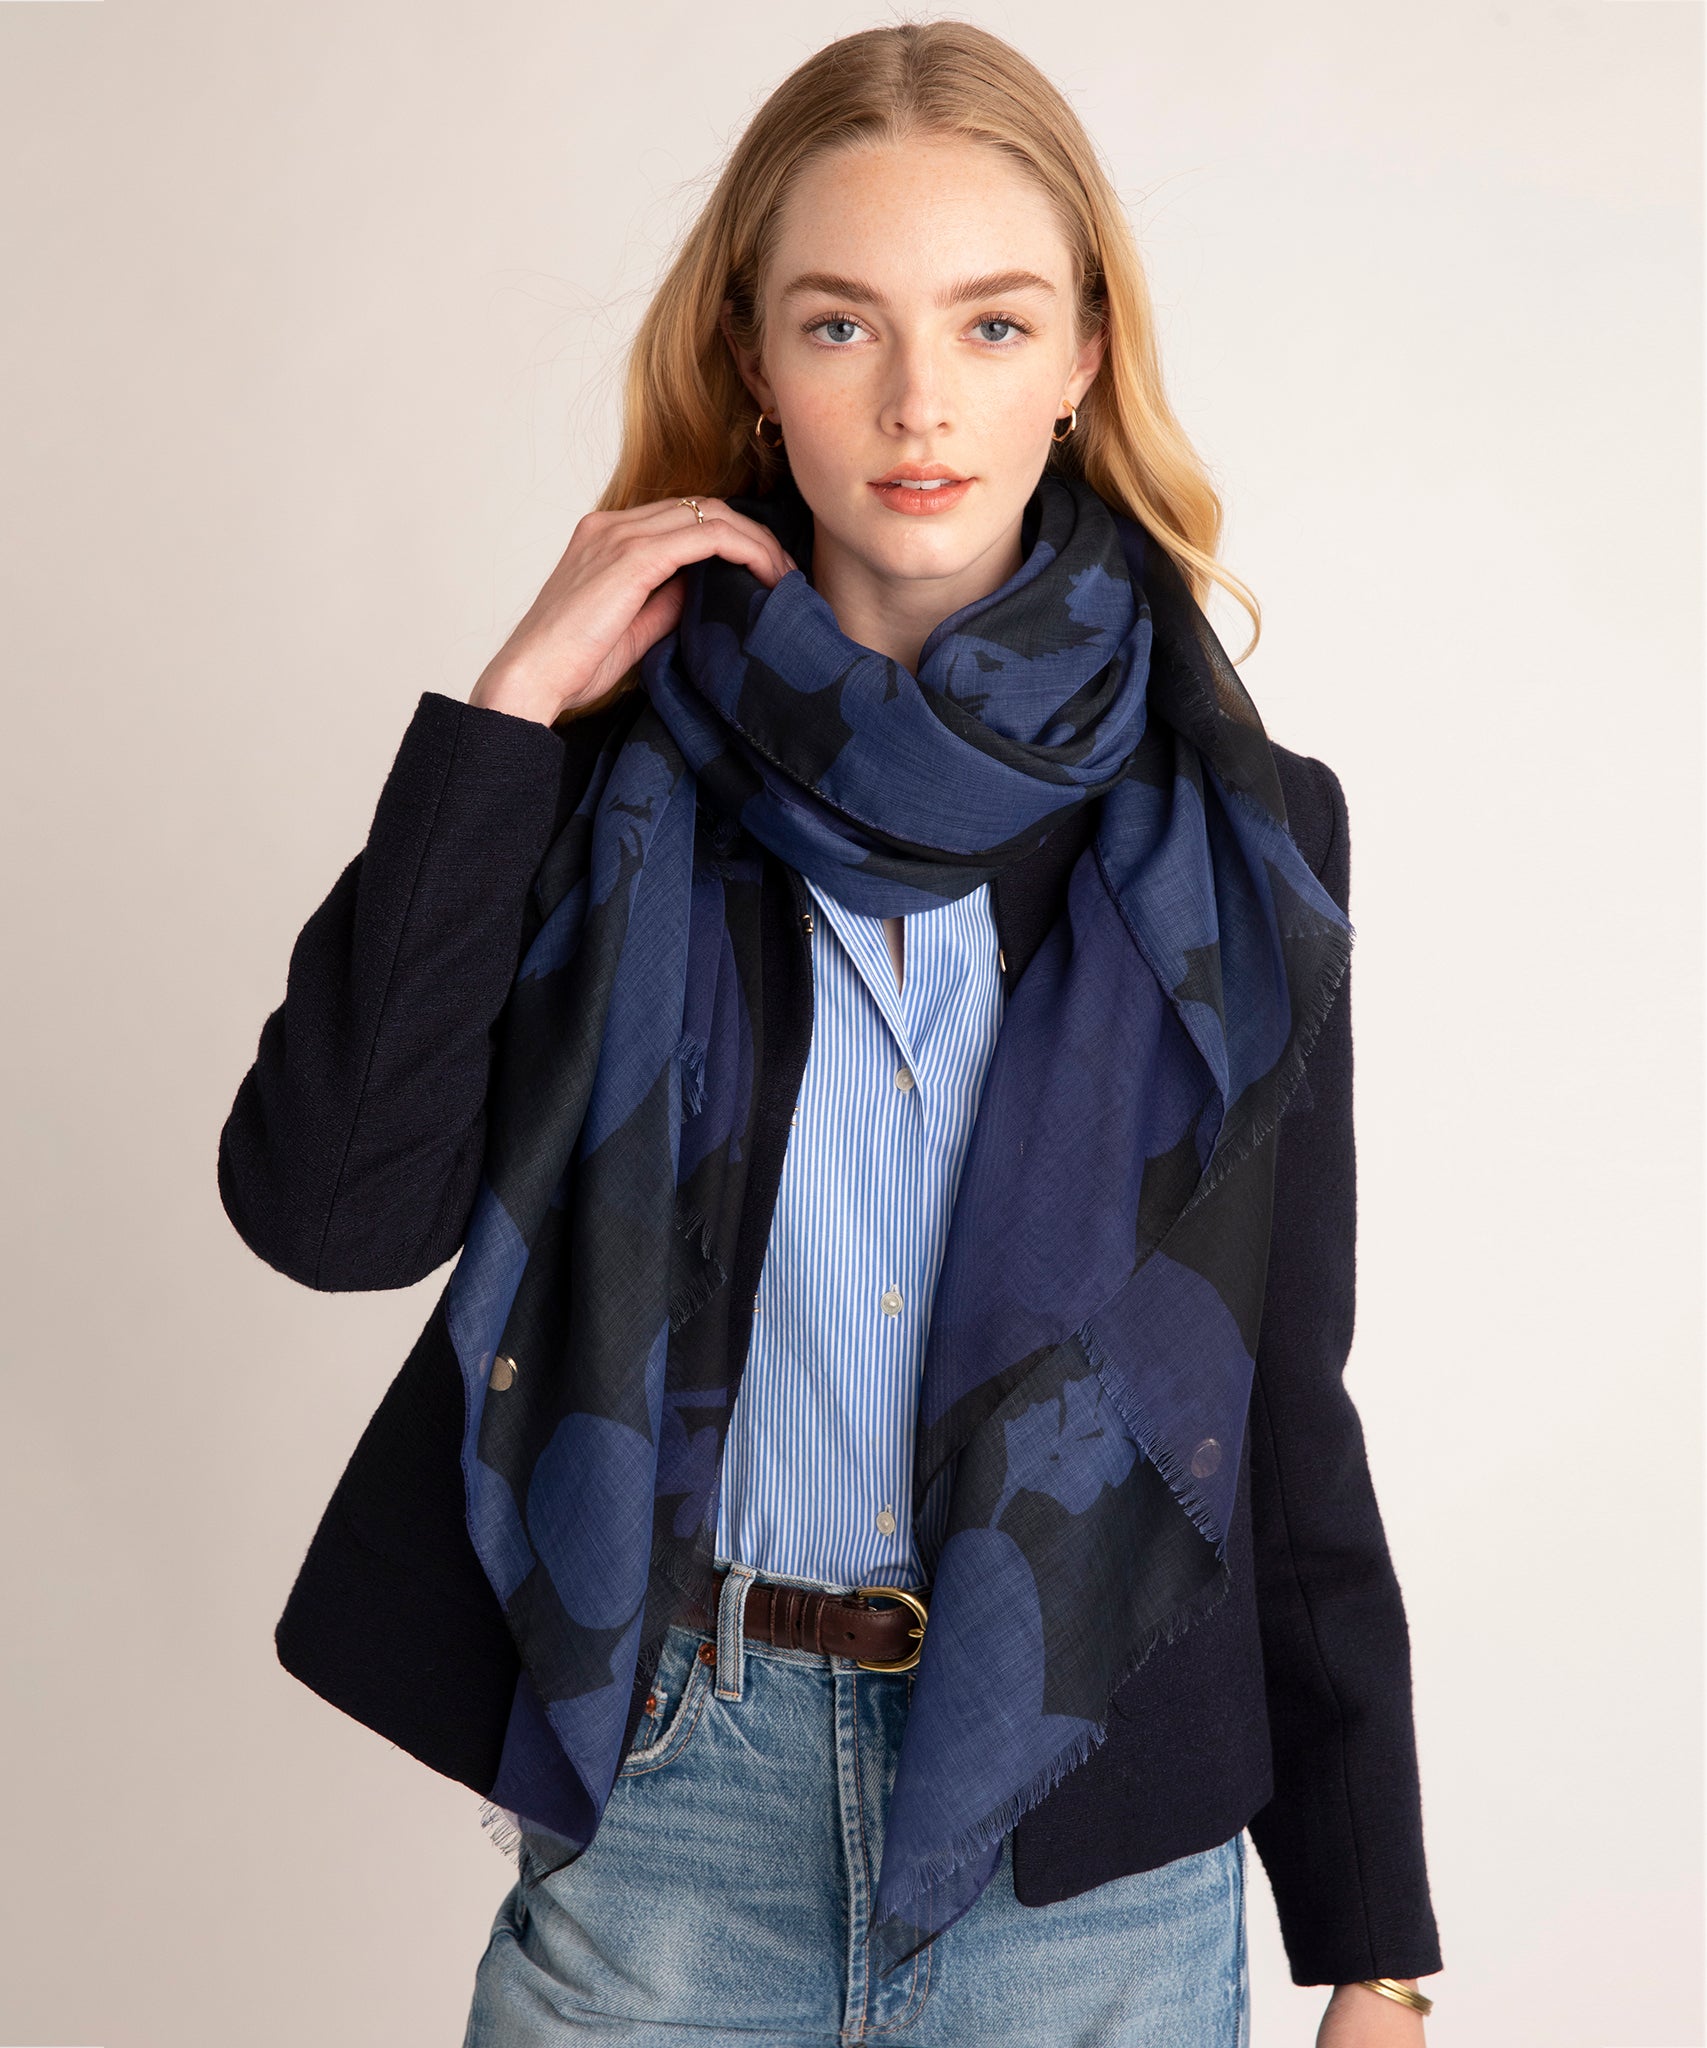 Flower Burst Sustainable Wrap in color Navy on a model